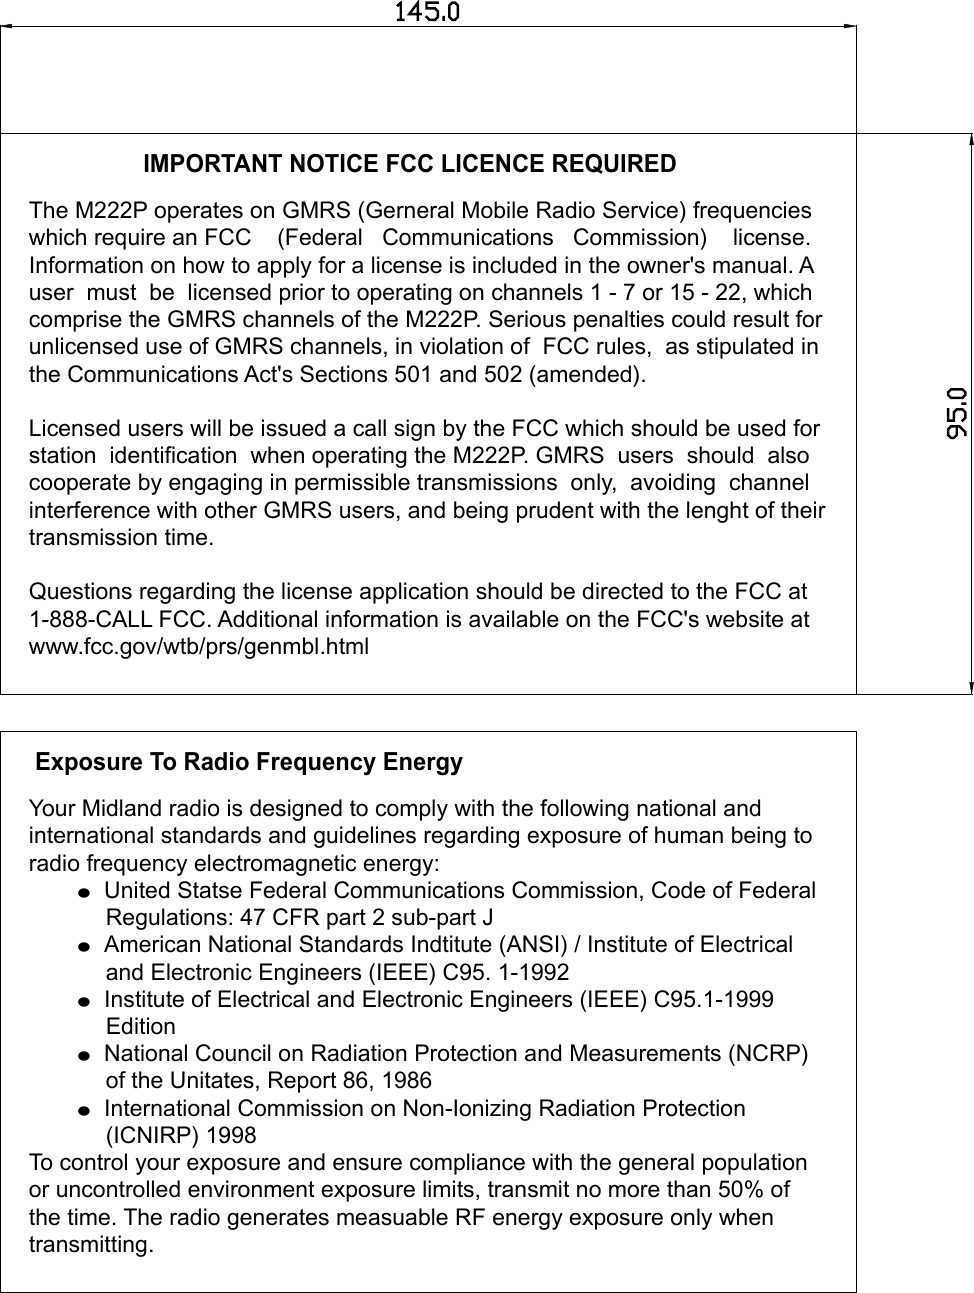 95.0145.0IMPORTANT NOTICE FCC LICENCE REQUIREDThe M222P operates on GMRS (Gerneral Mobile Radio Service) frequencieswhich require an FCC    (Federal   Communications   Commission)    license. Information on how to apply for a license is included in the owner&apos;s manual. Auser  must  be  licensed prior to operating on channels 1 - 7 or 15 - 22, whichcomprise the GMRS channels of the M222P. Serious penalties could result for unlicensed use of GMRS channels, in violation of  FCC rules,  as stipulated inthe Communications Act&apos;s Sections 501 and 502 (amended).Licensed users will be issued a call sign by the FCC which should be used forstation  identification  when operating the M222P. GMRS  users  should  also cooperate by engaging in permissible transmissions  only,  avoiding  channelinterference with other GMRS users, and being prudent with the lenght of theirtransmission time.Questions regarding the license application should be directed to the FCC at1-888-CALL FCC. Additional information is available on the FCC&apos;s website atwww.fcc.gov/wtb/prs/genmbl.htmlExposure To Radio Frequency EnergyYour Midland radio is designed to comply with the following national and international standards and guidelines regarding exposure of human being toradio frequency electromagnetic energy:       = United Statse Federal Communications Commission, Code of Federal            Regulations: 47 CFR part 2 sub-part J       = American National Standards Indtitute (ANSI) / Institute of Electrical             and Electronic Engineers (IEEE) C95. 1-1992       = Institute of Electrical and Electronic Engineers (IEEE) C95.1-1999             Edition       = National Council on Radiation Protection and Measurements (NCRP)            of the Unitates, Report 86, 1986       = International Commission on Non-Ionizing Radiation Protection             (ICNIRP) 1998To control your exposure and ensure compliance with the general populationor uncontrolled environment exposure limits, transmit no more than 50% of the time. The radio generates measuable RF energy exposure only when transmitting. 